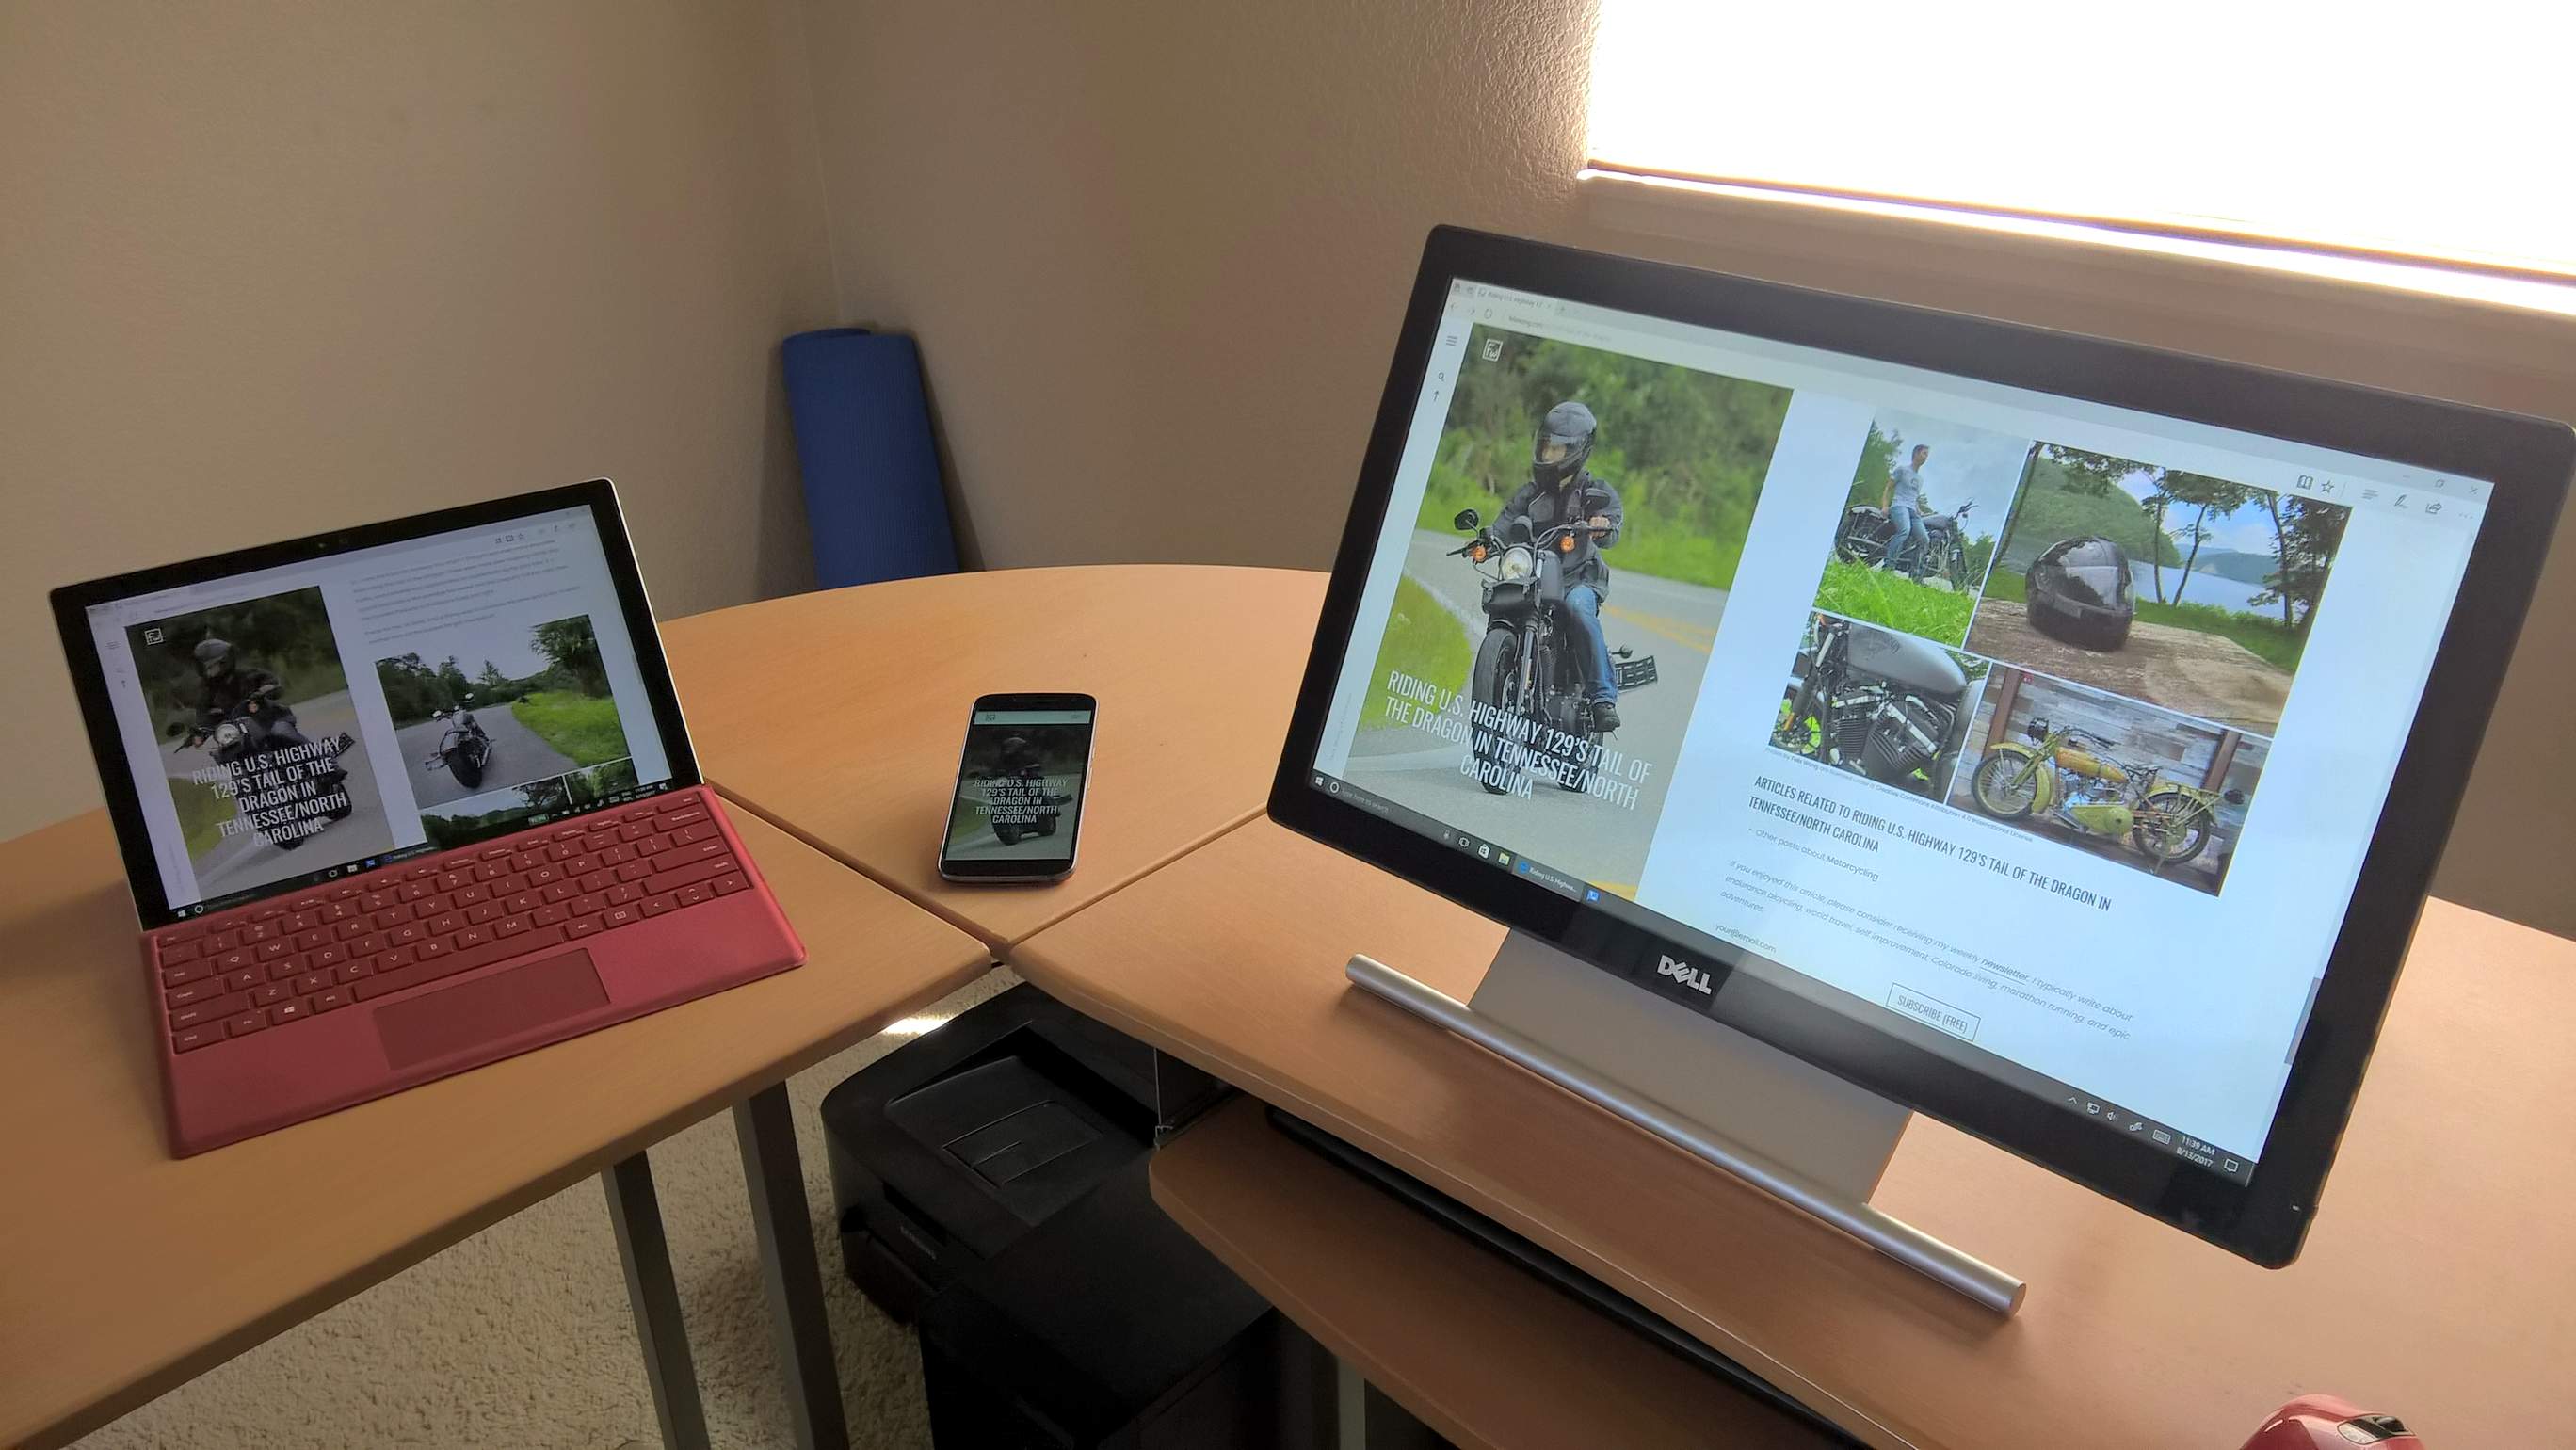 FelixWong.com website on Surface Pro 4, Moto G4 smartphone, and 21.5" Dell Monitor.